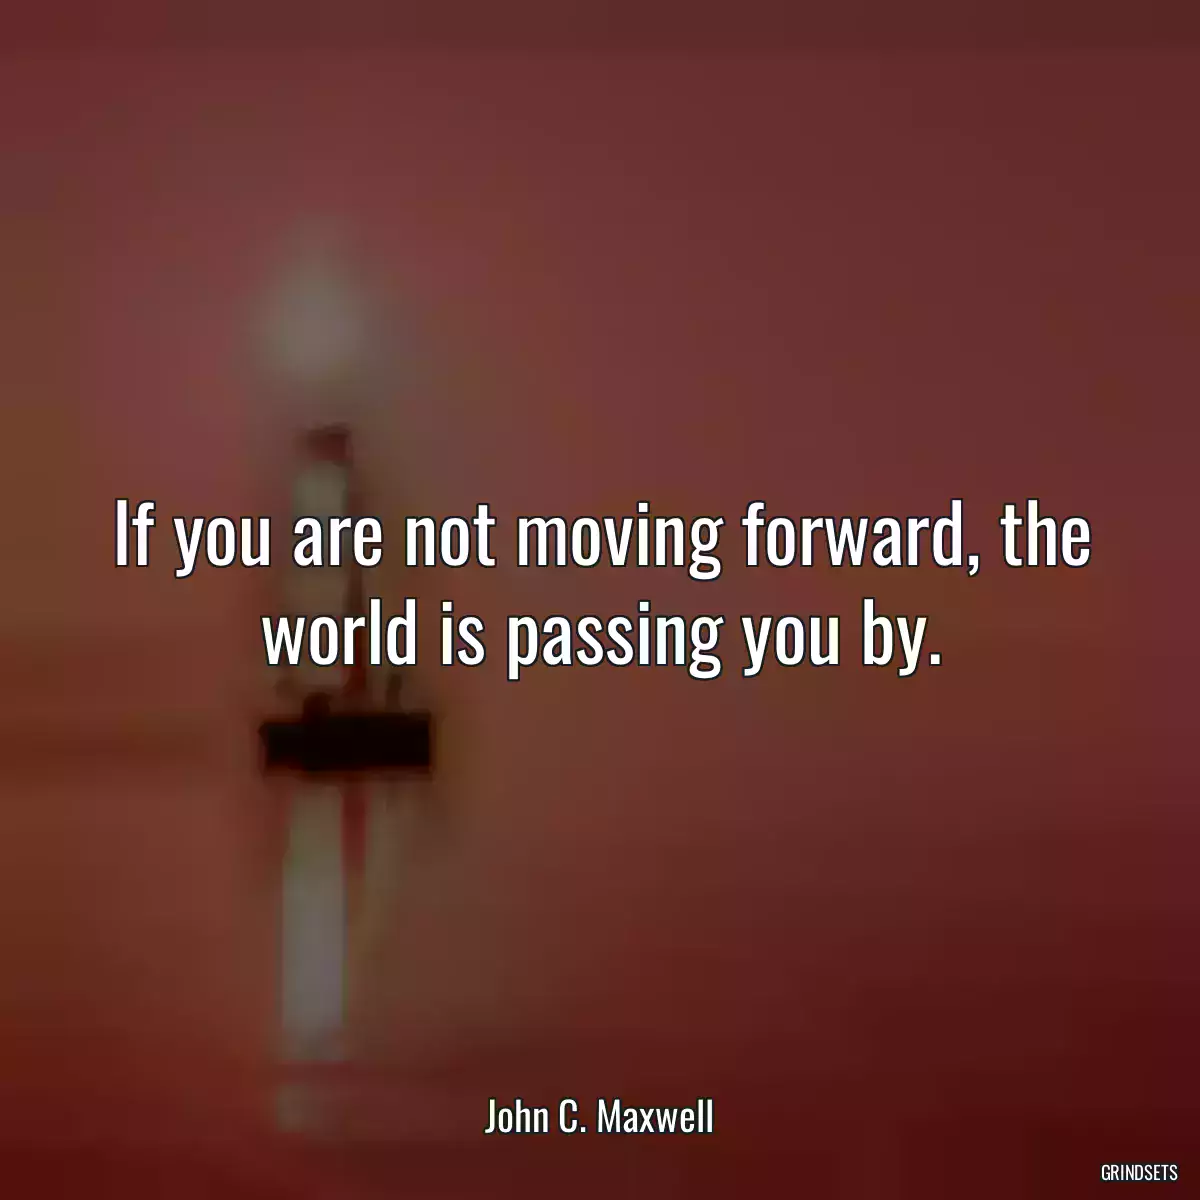 If you are not moving forward, the world is passing you by.